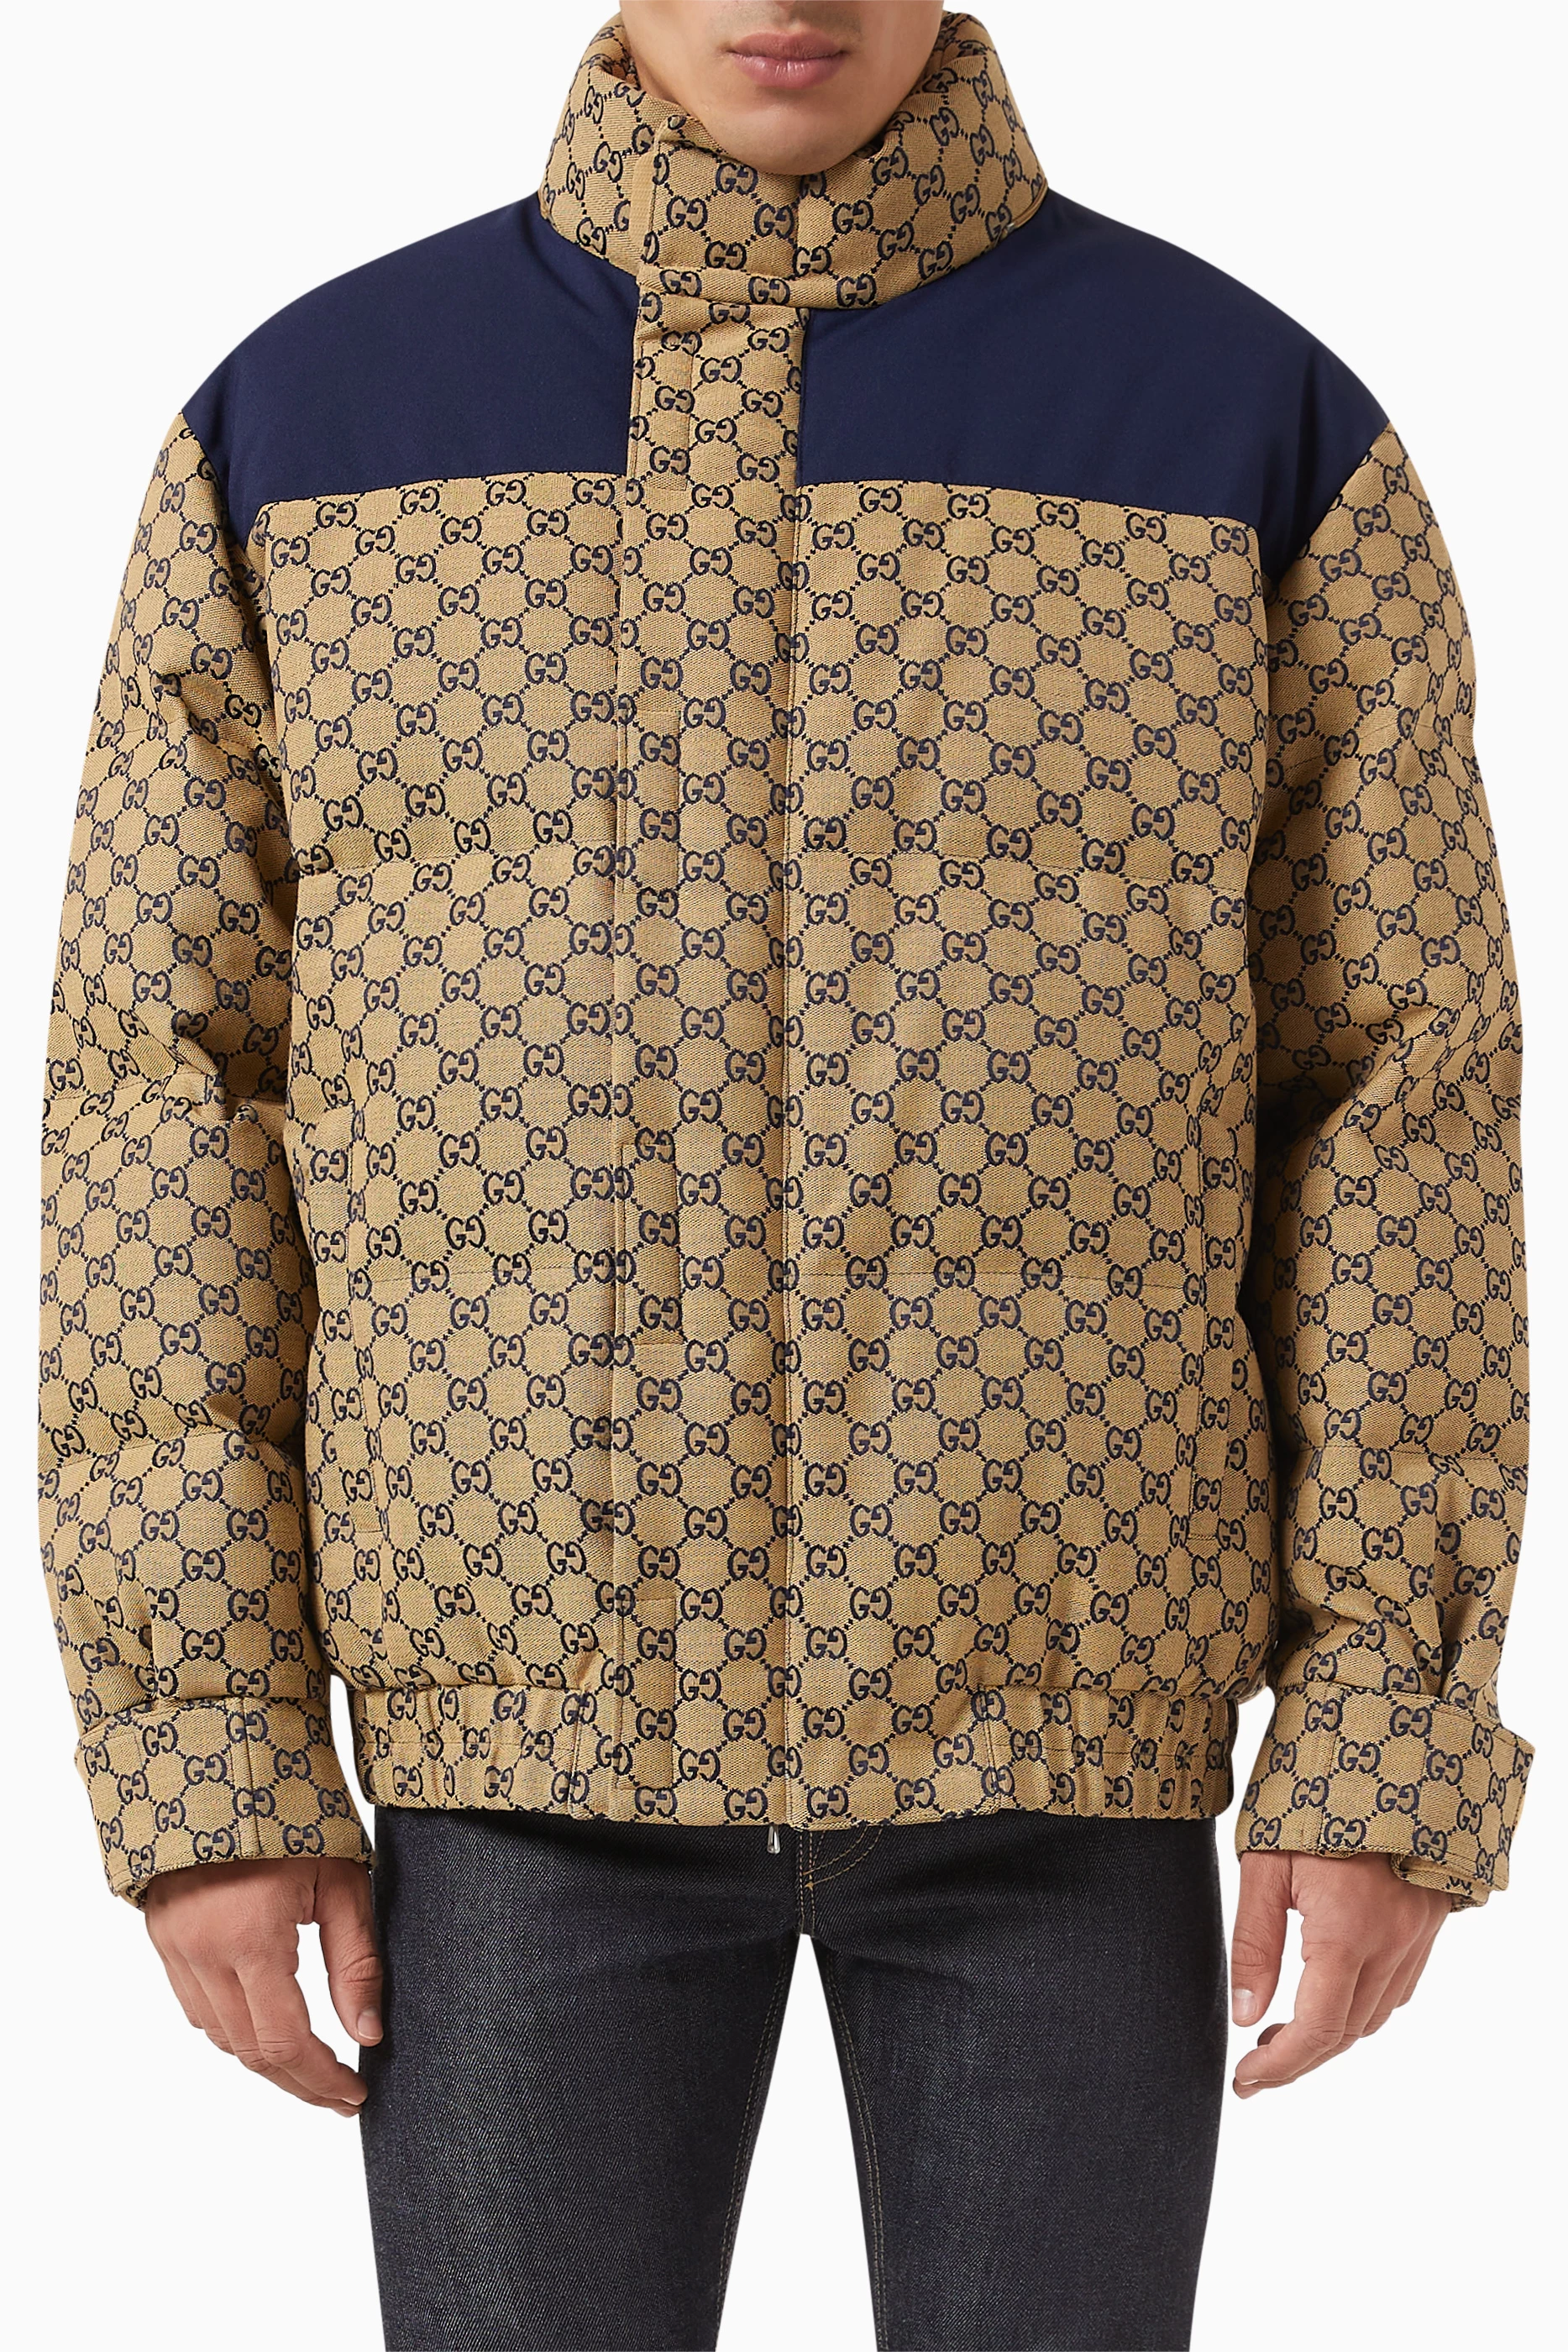 Gucci Gg Monogram Padded Jacket In Brown